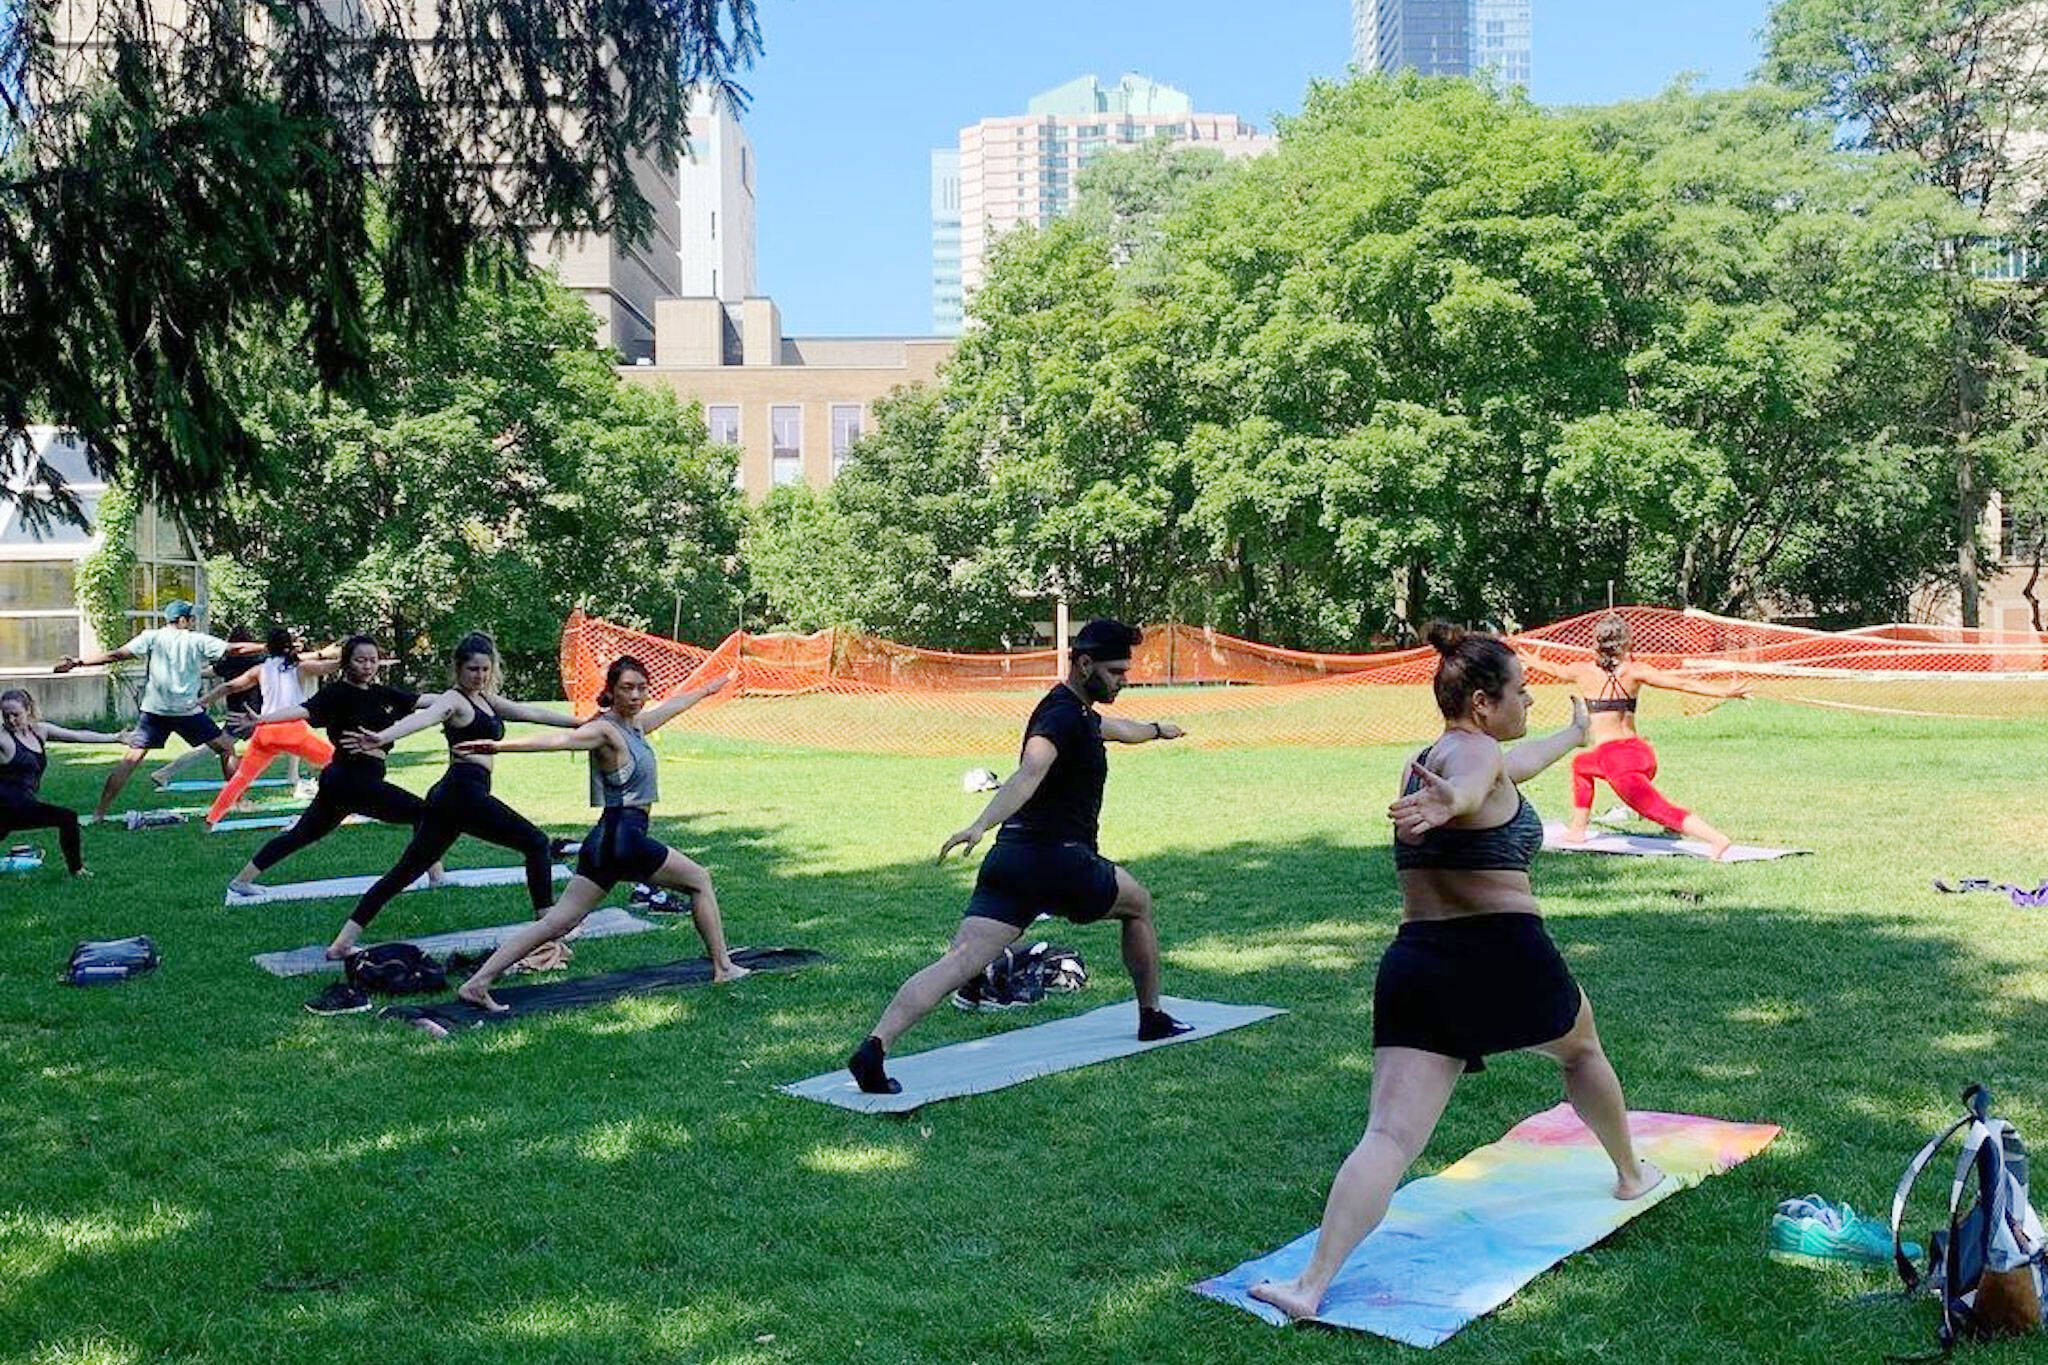 https://media.blogto.com/articles/20210326-outdoor-fitness-classes-toronto-2.jpg?w=2048&cmd=resize_then_crop&height=1365&quality=70